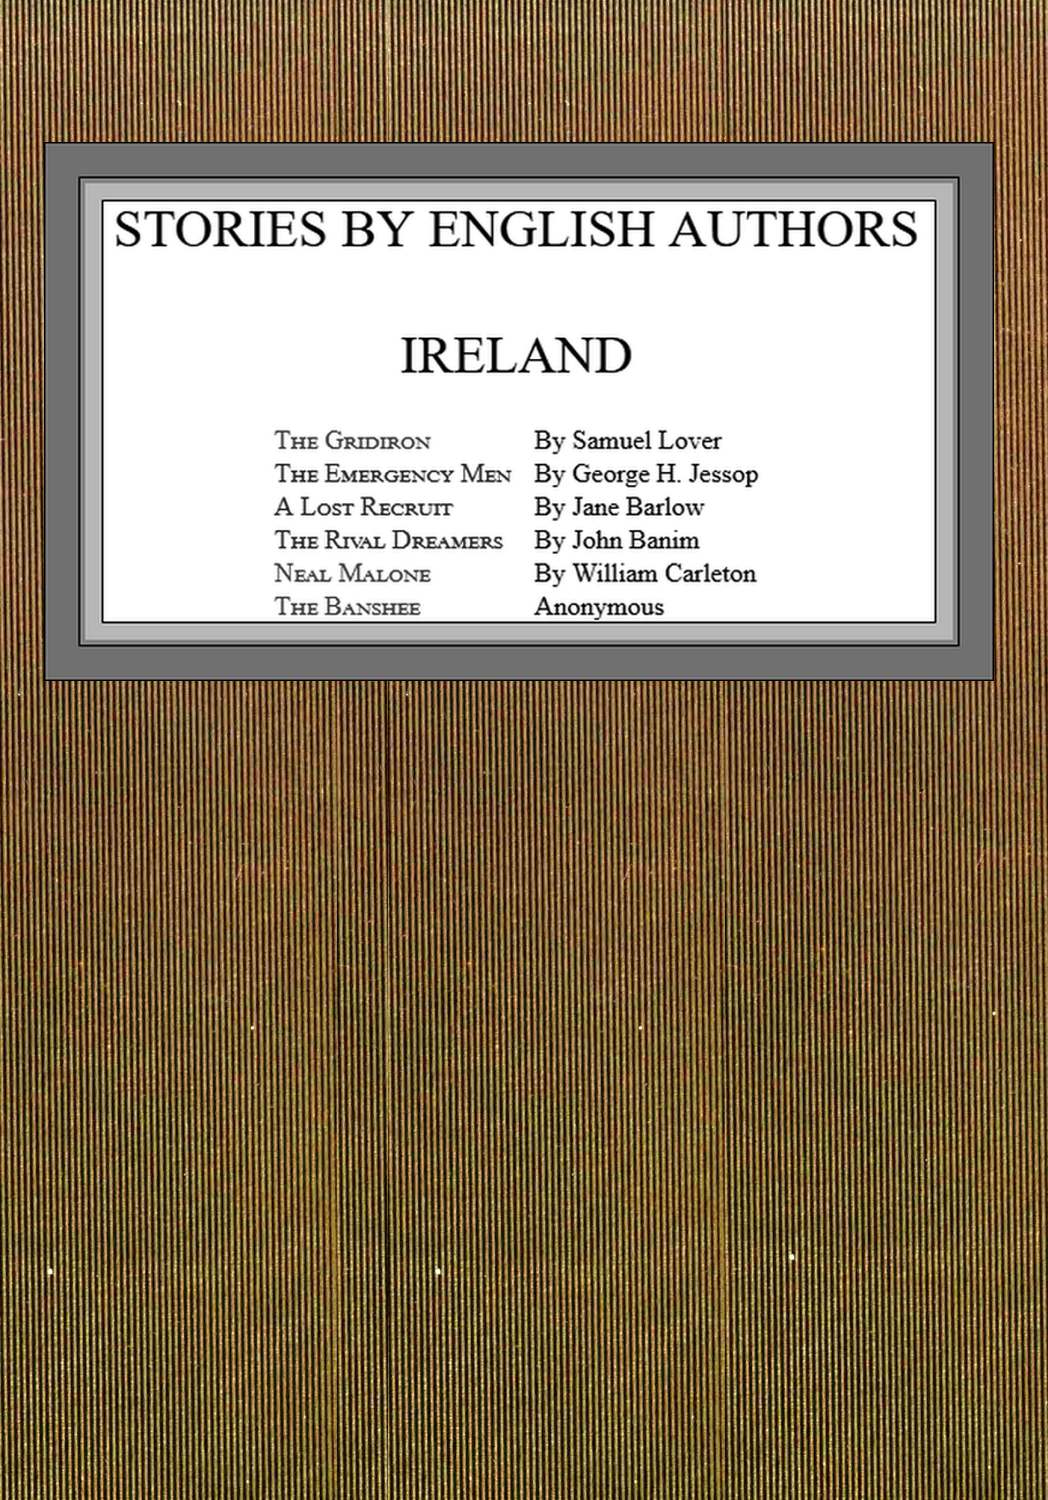 The Project Gutenberg eBook of Stories By English Authors.